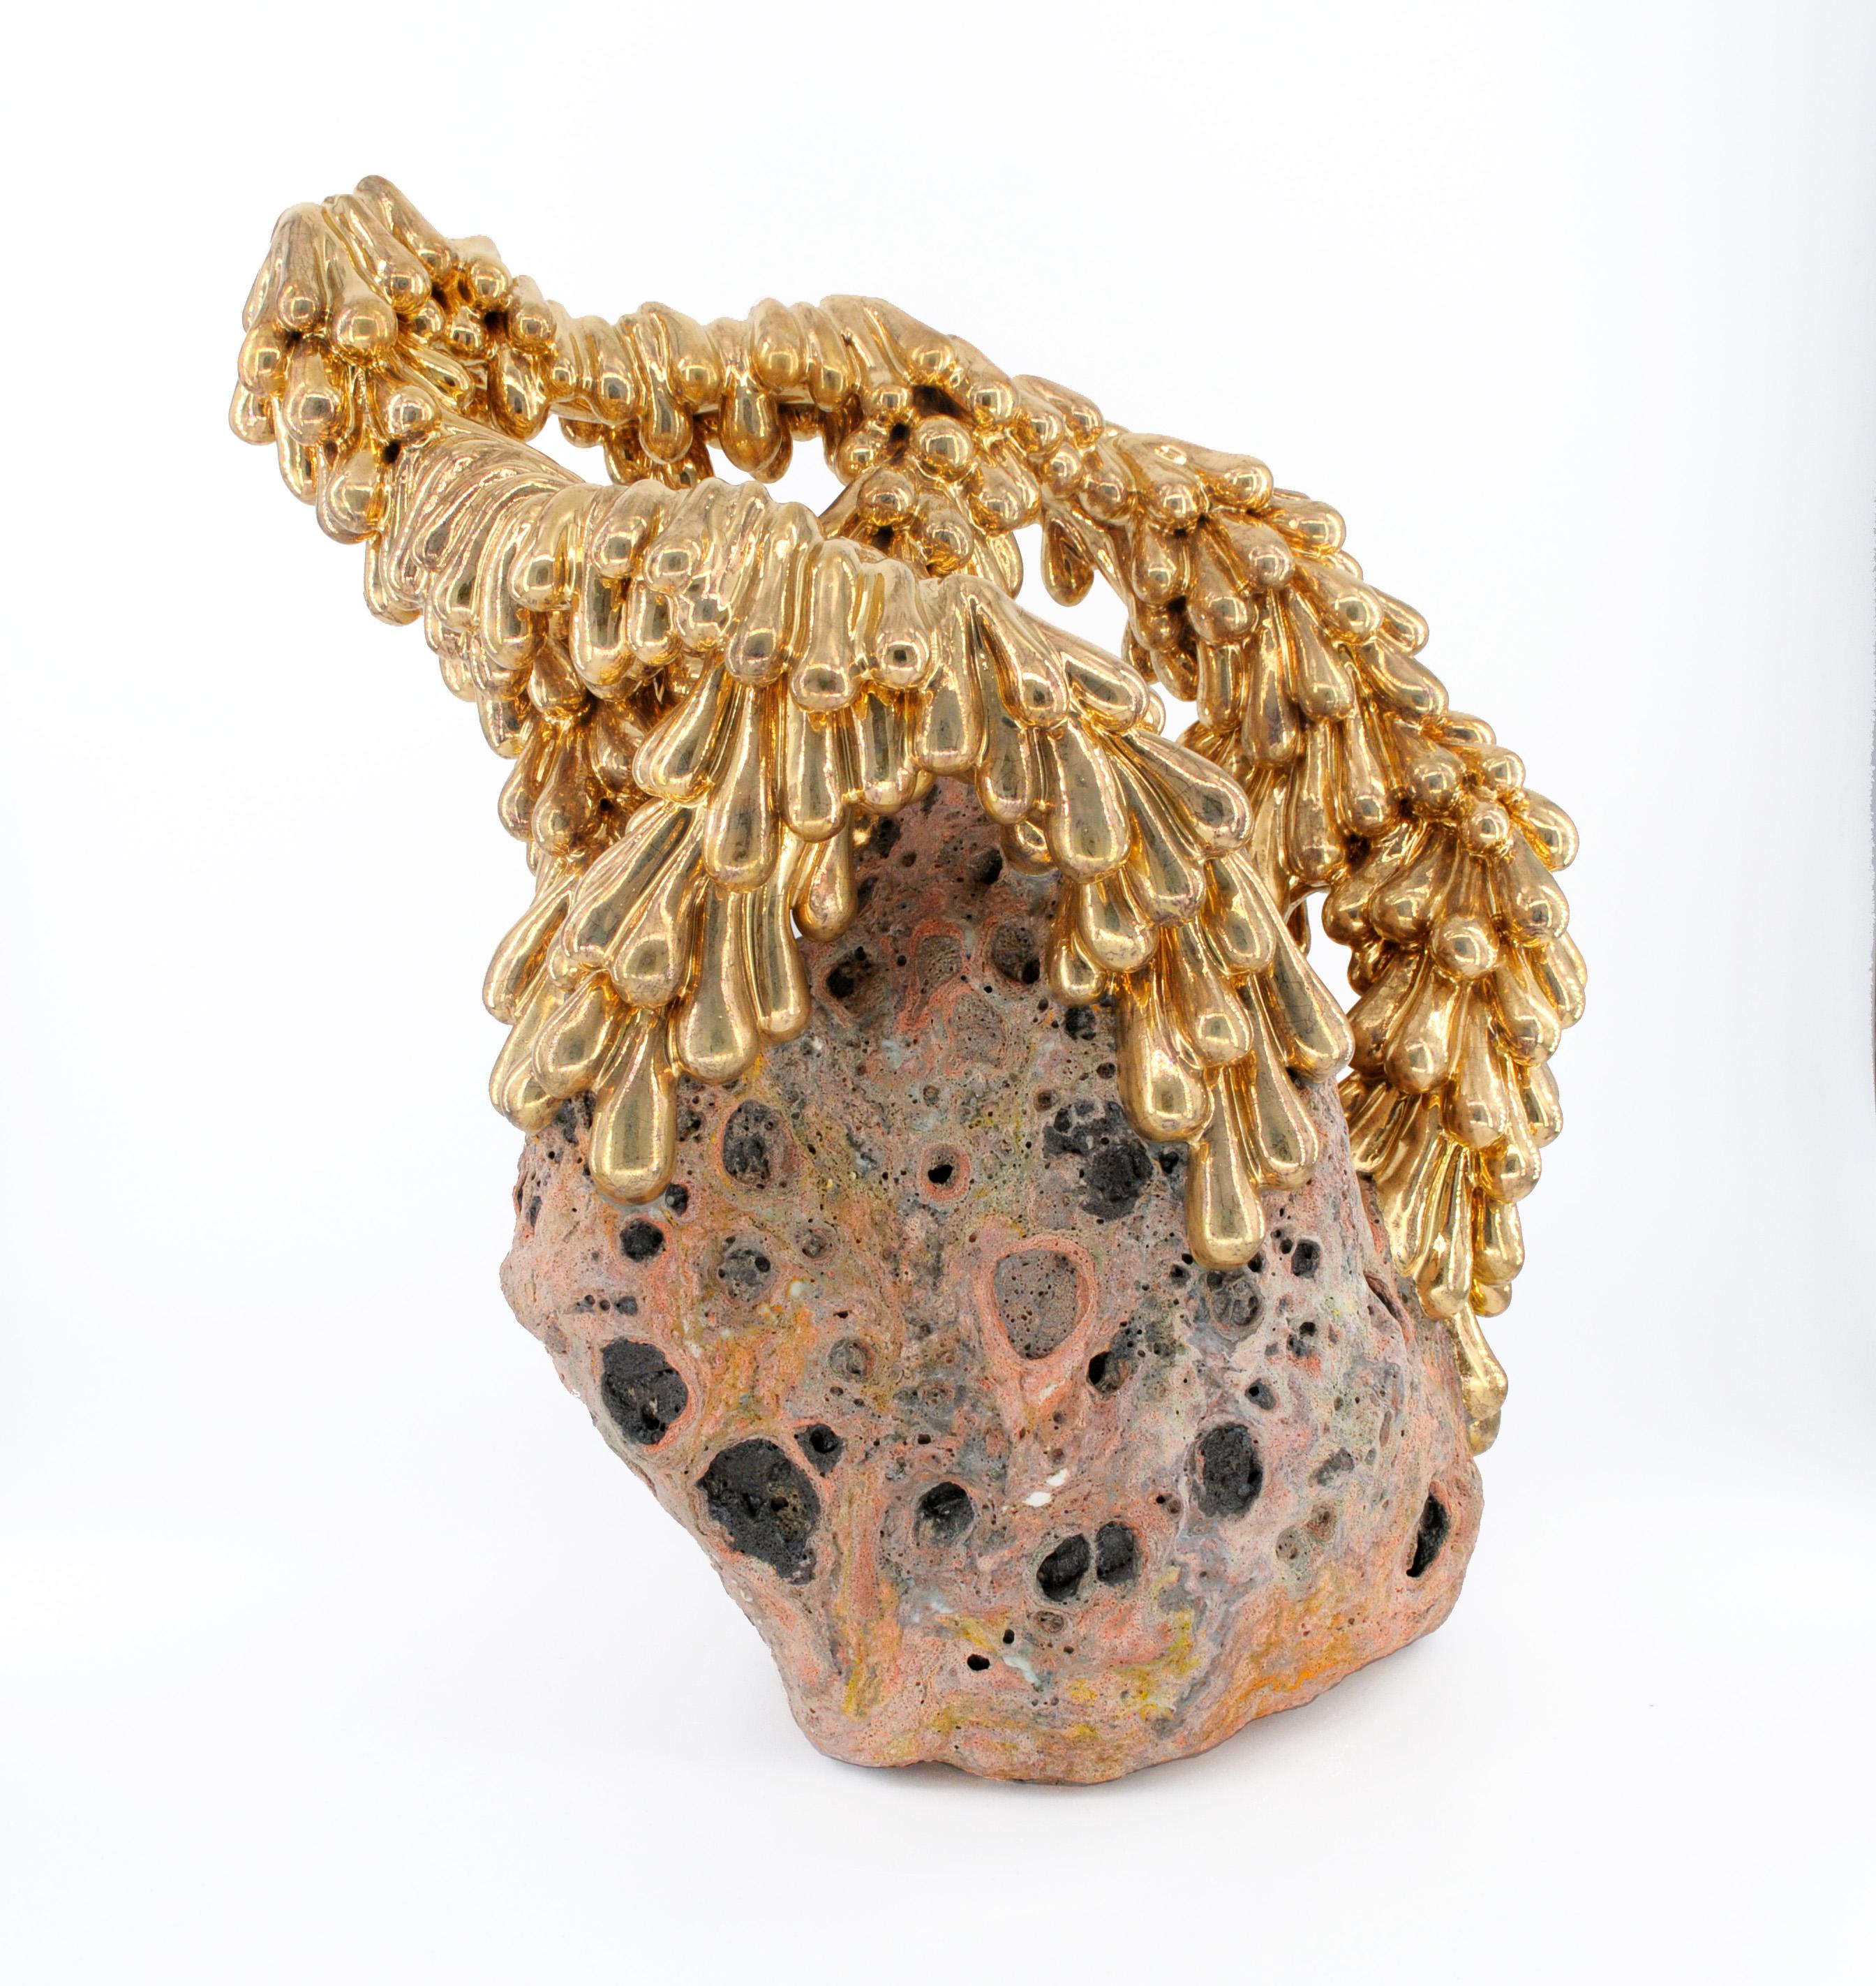 Sasha Koozel Reibstein Abstract Sculpture - "Forged in Flame", gilded abstract ceramic structure, organic, geological